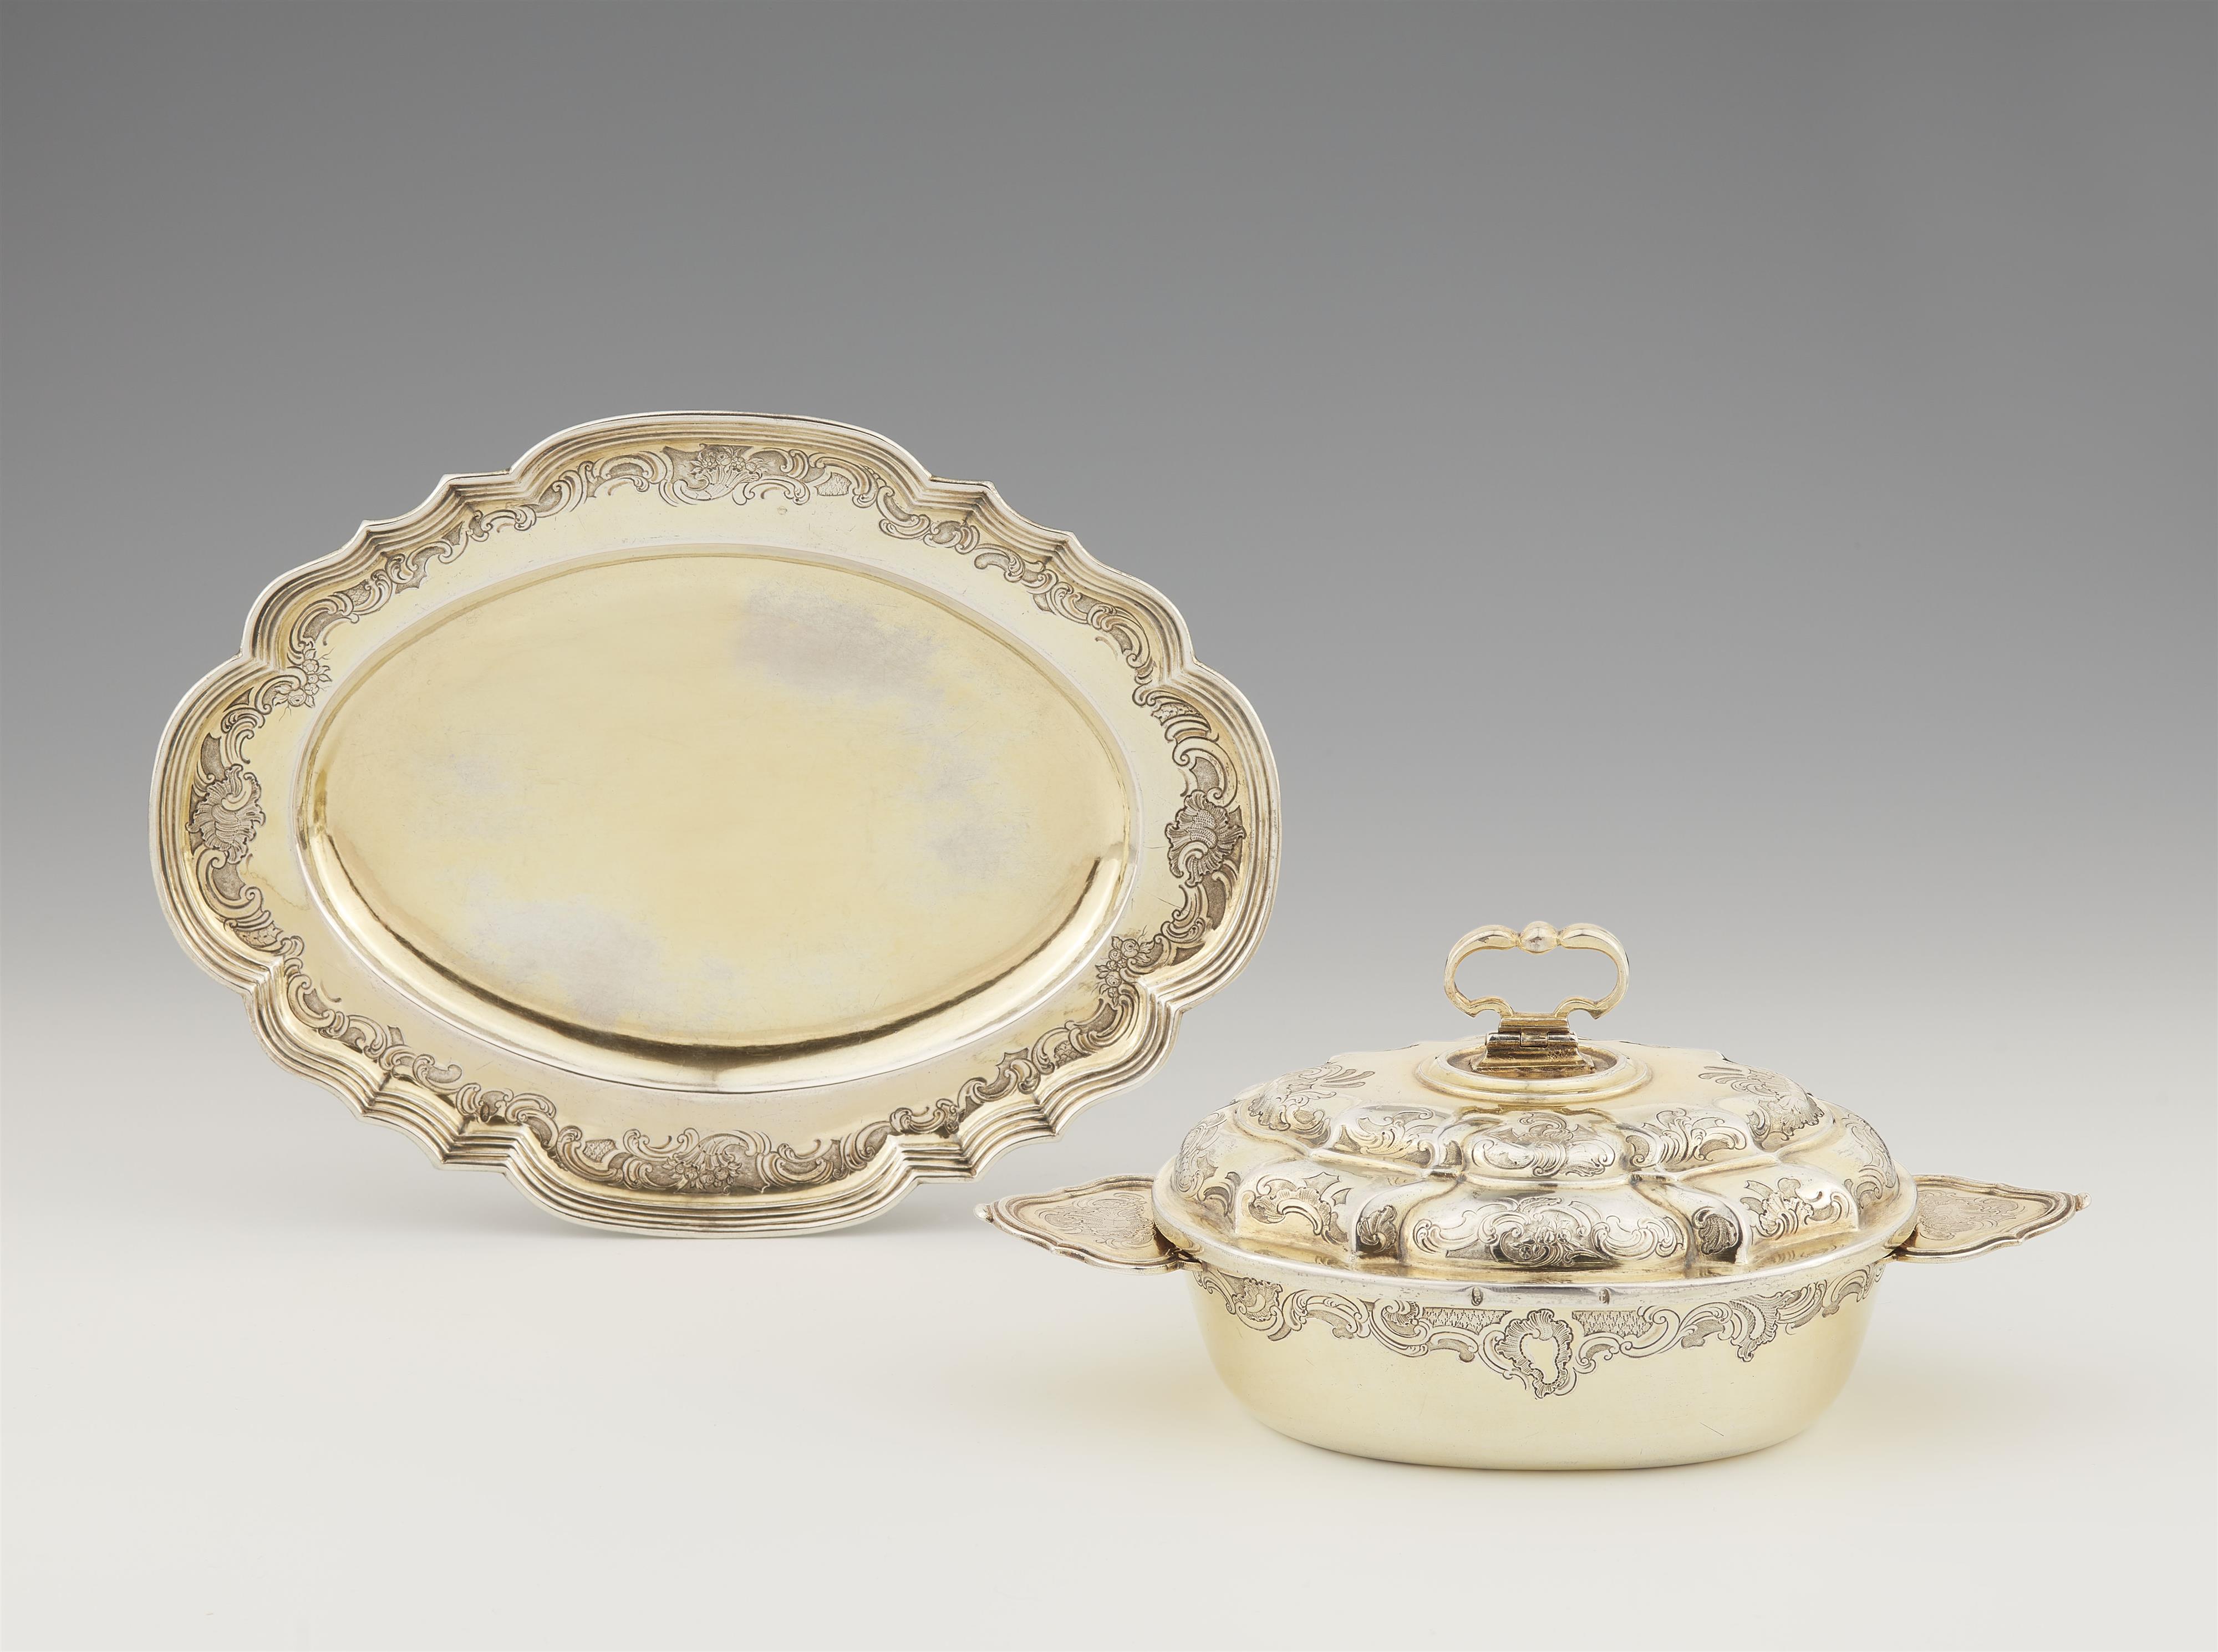 A rare Augsburg silver gilt ecuelle and stand - image-1